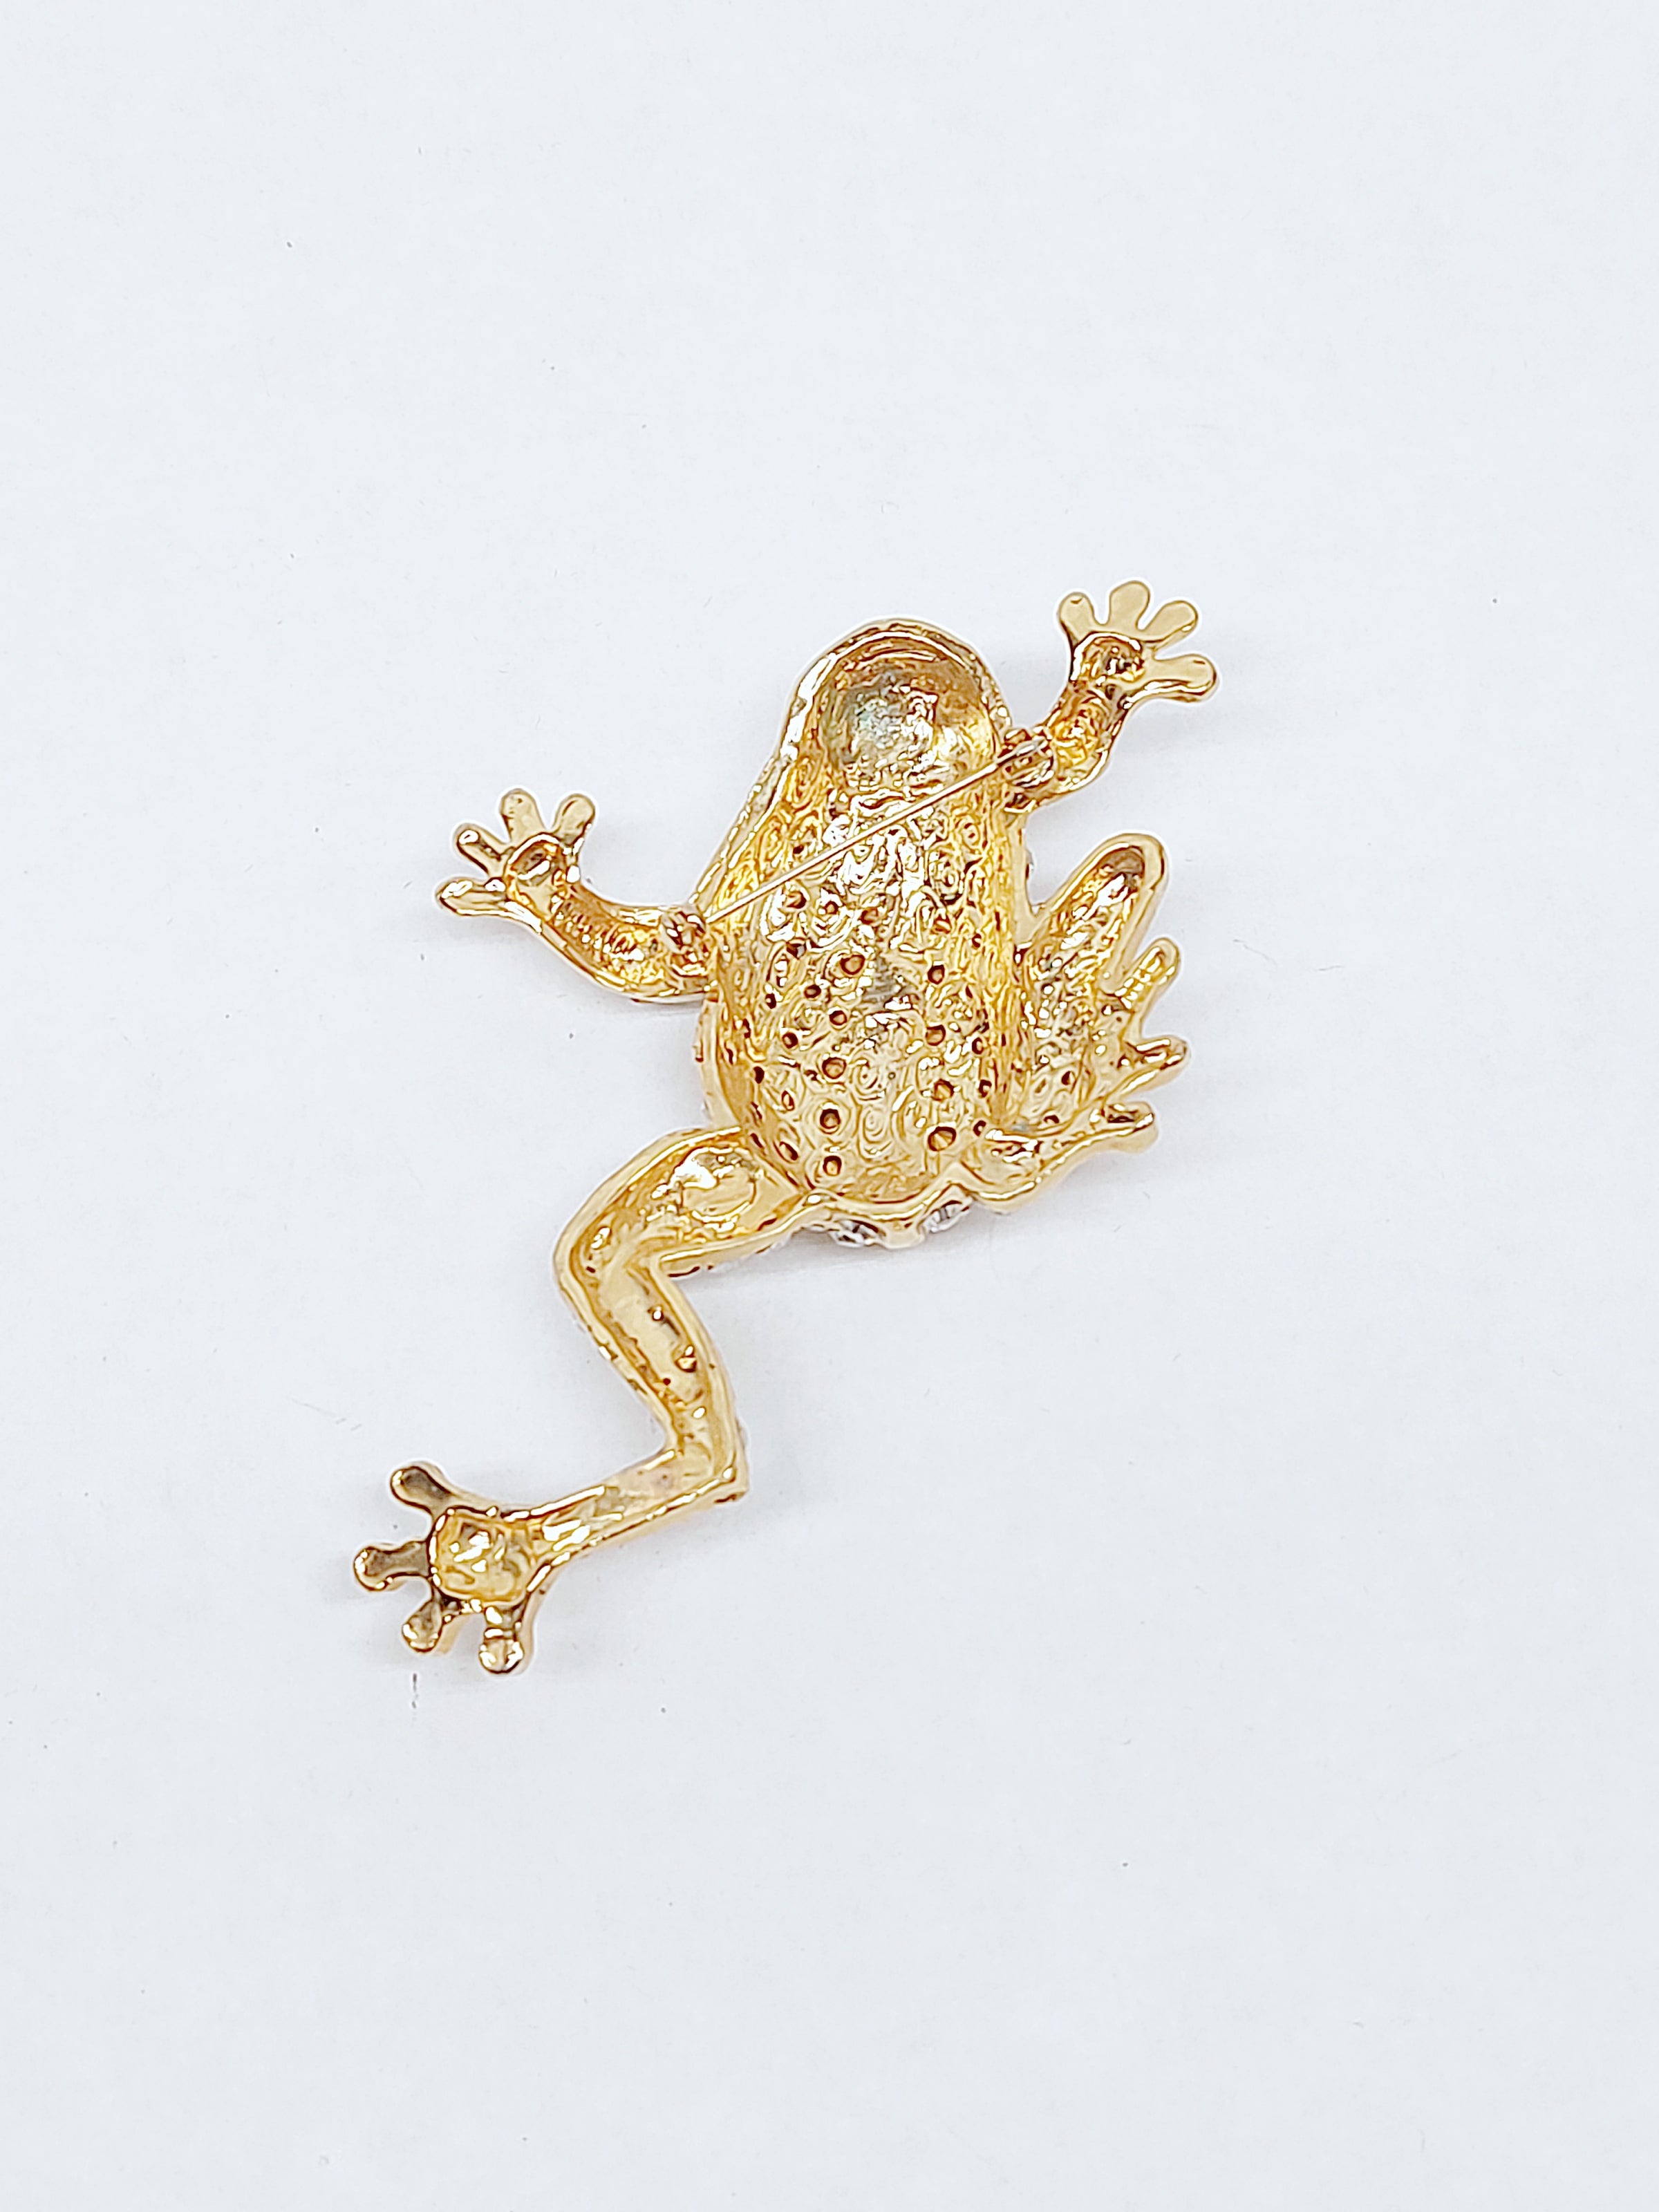 Brassy Gold Toned Metal Brooch Pins with Harlequin Motif - Treefrog Beads